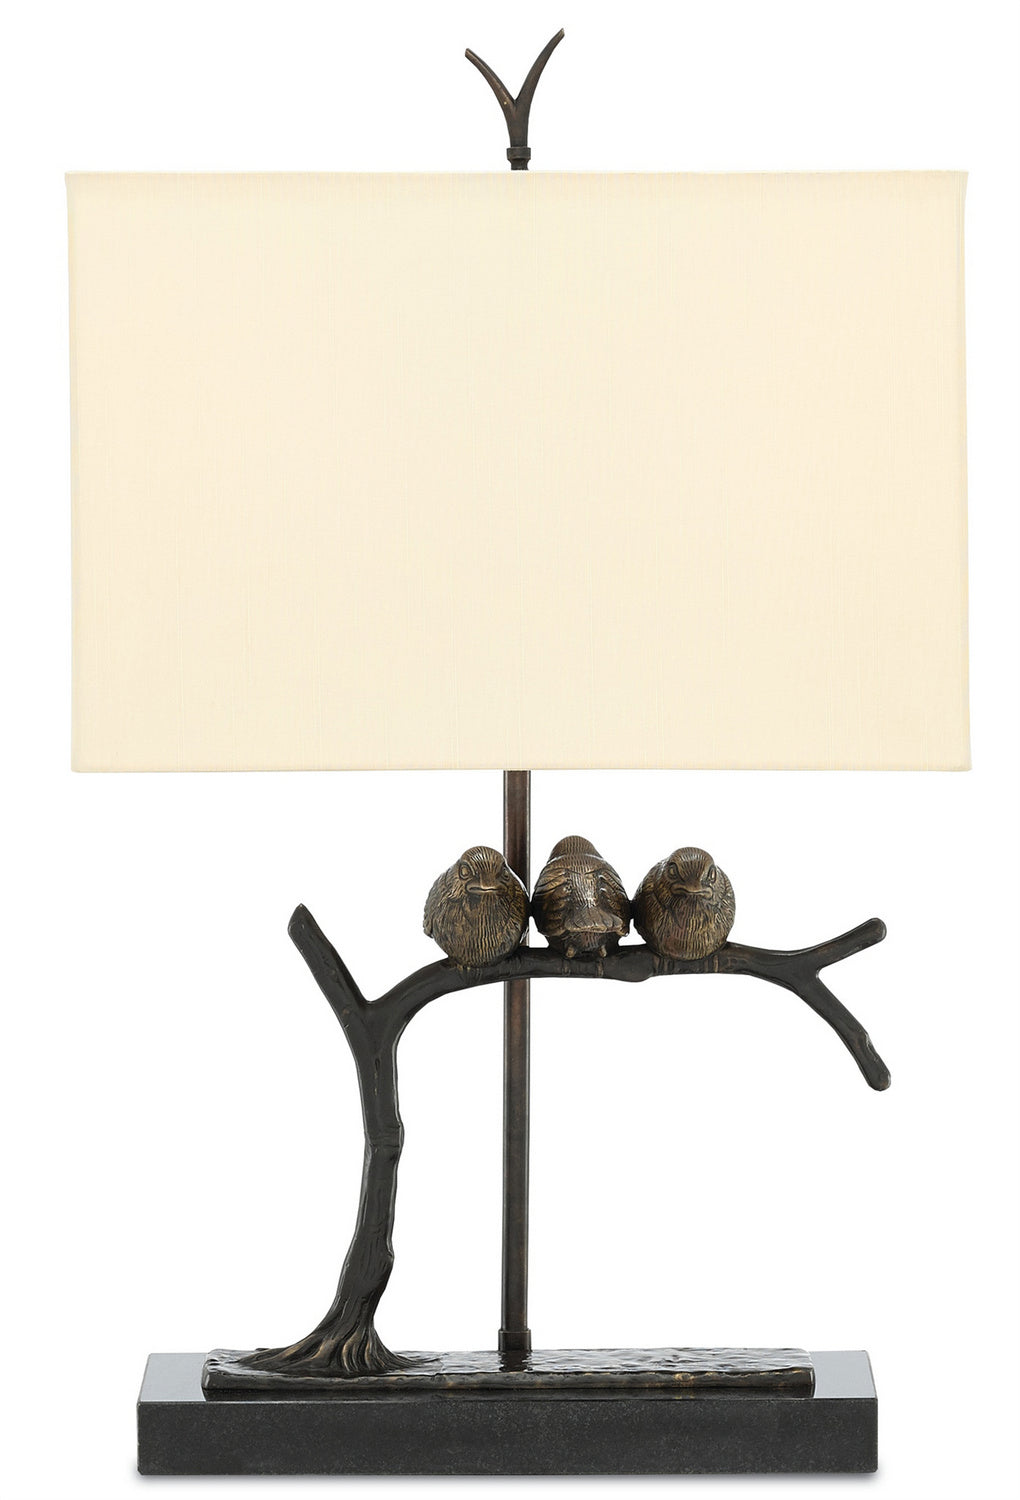 Two Light Table Lamp from the Sparrow collection in Bronze/Black finish